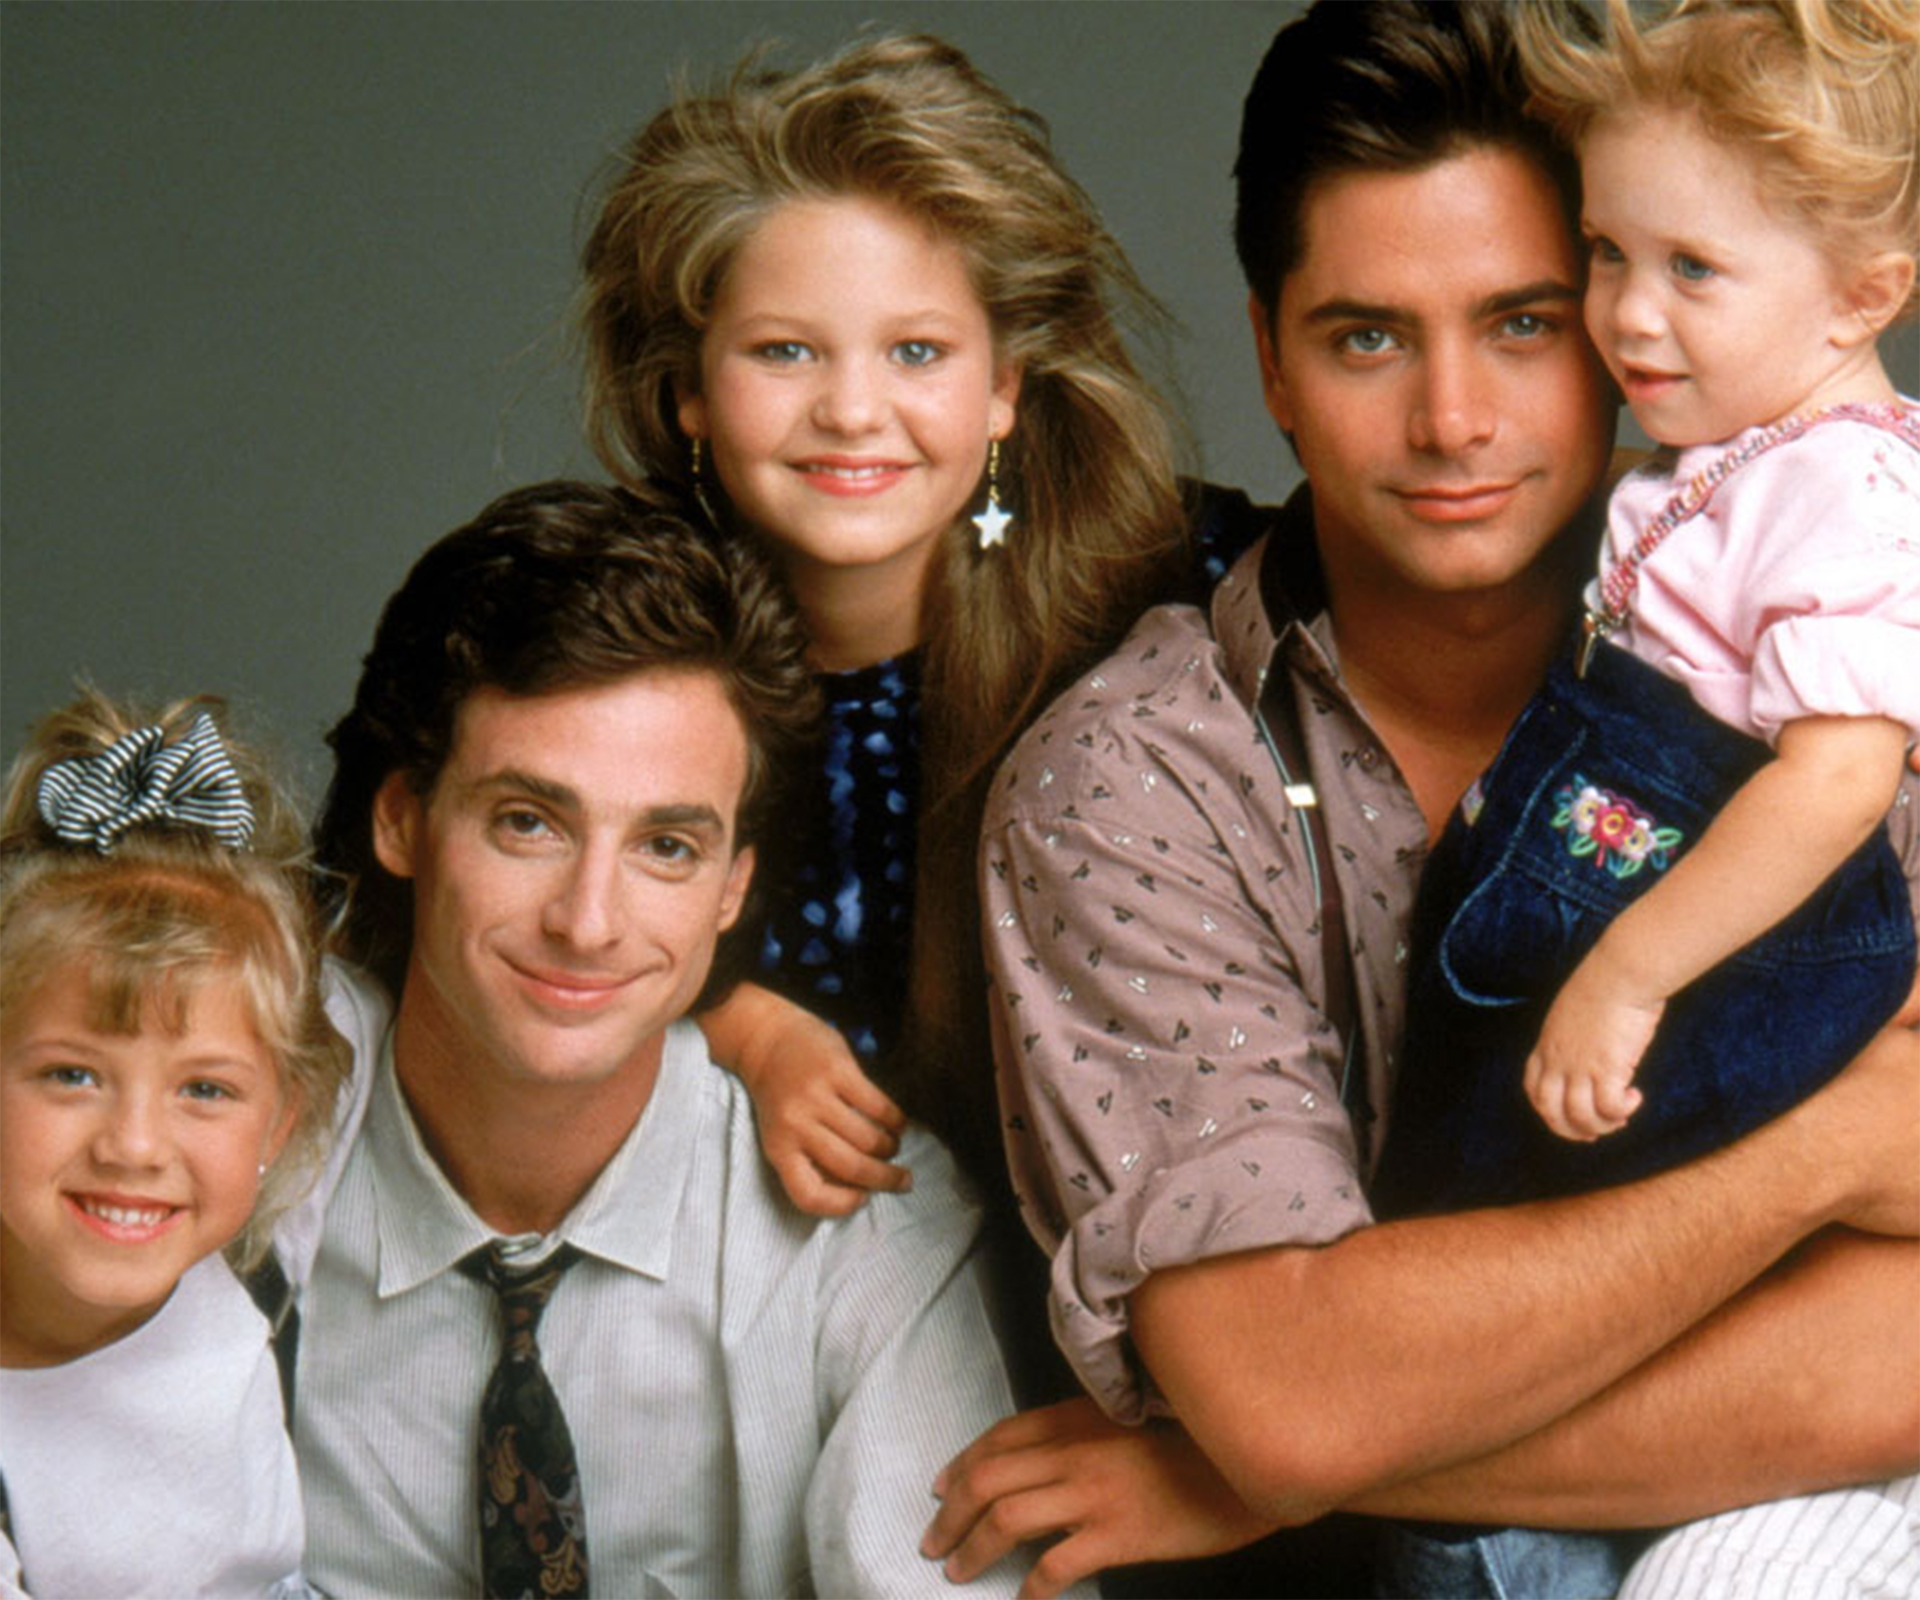 That ‘Full House’ revival is finally on the books